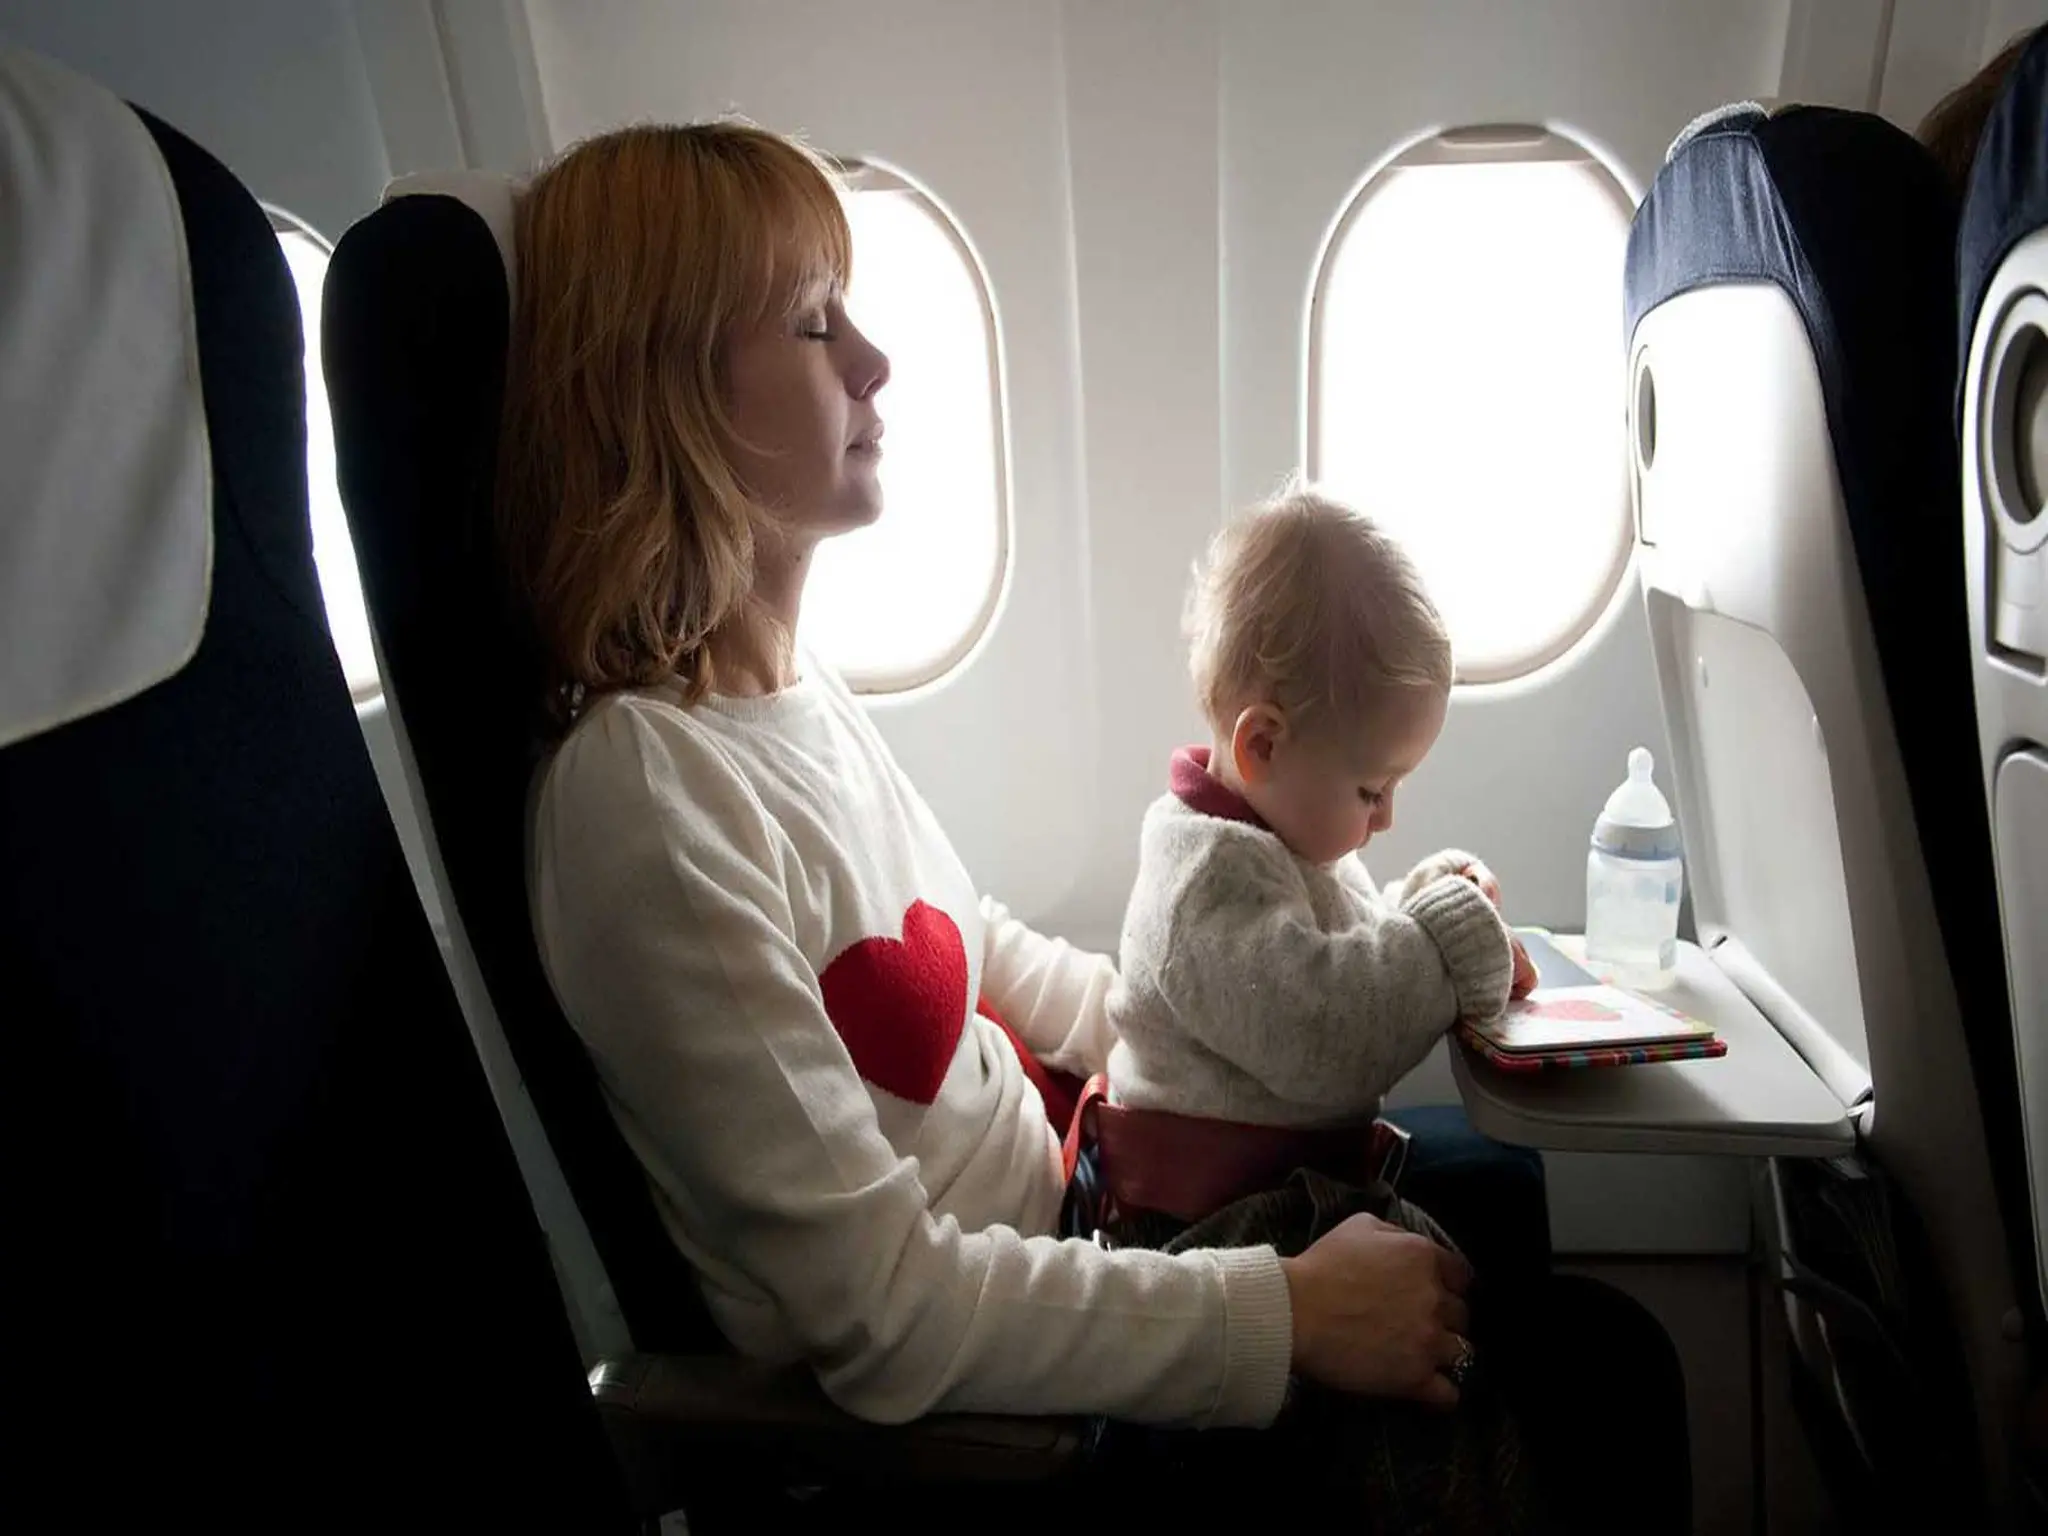 UAE sets requirements for traveling with infants on board its airlines